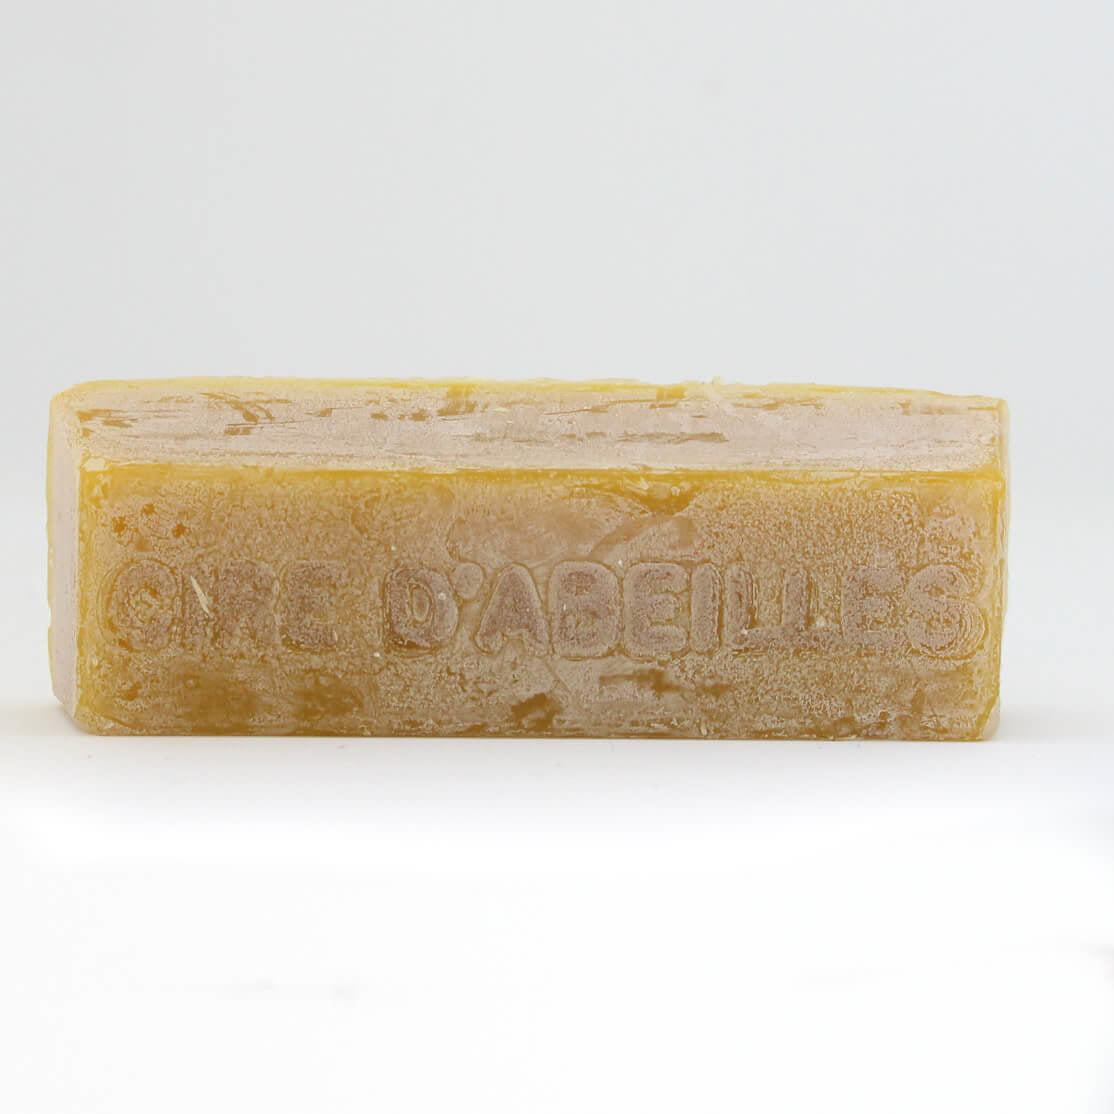 1 beeswax bar covered in bloom. The bar says "cire d'abeilles" on it